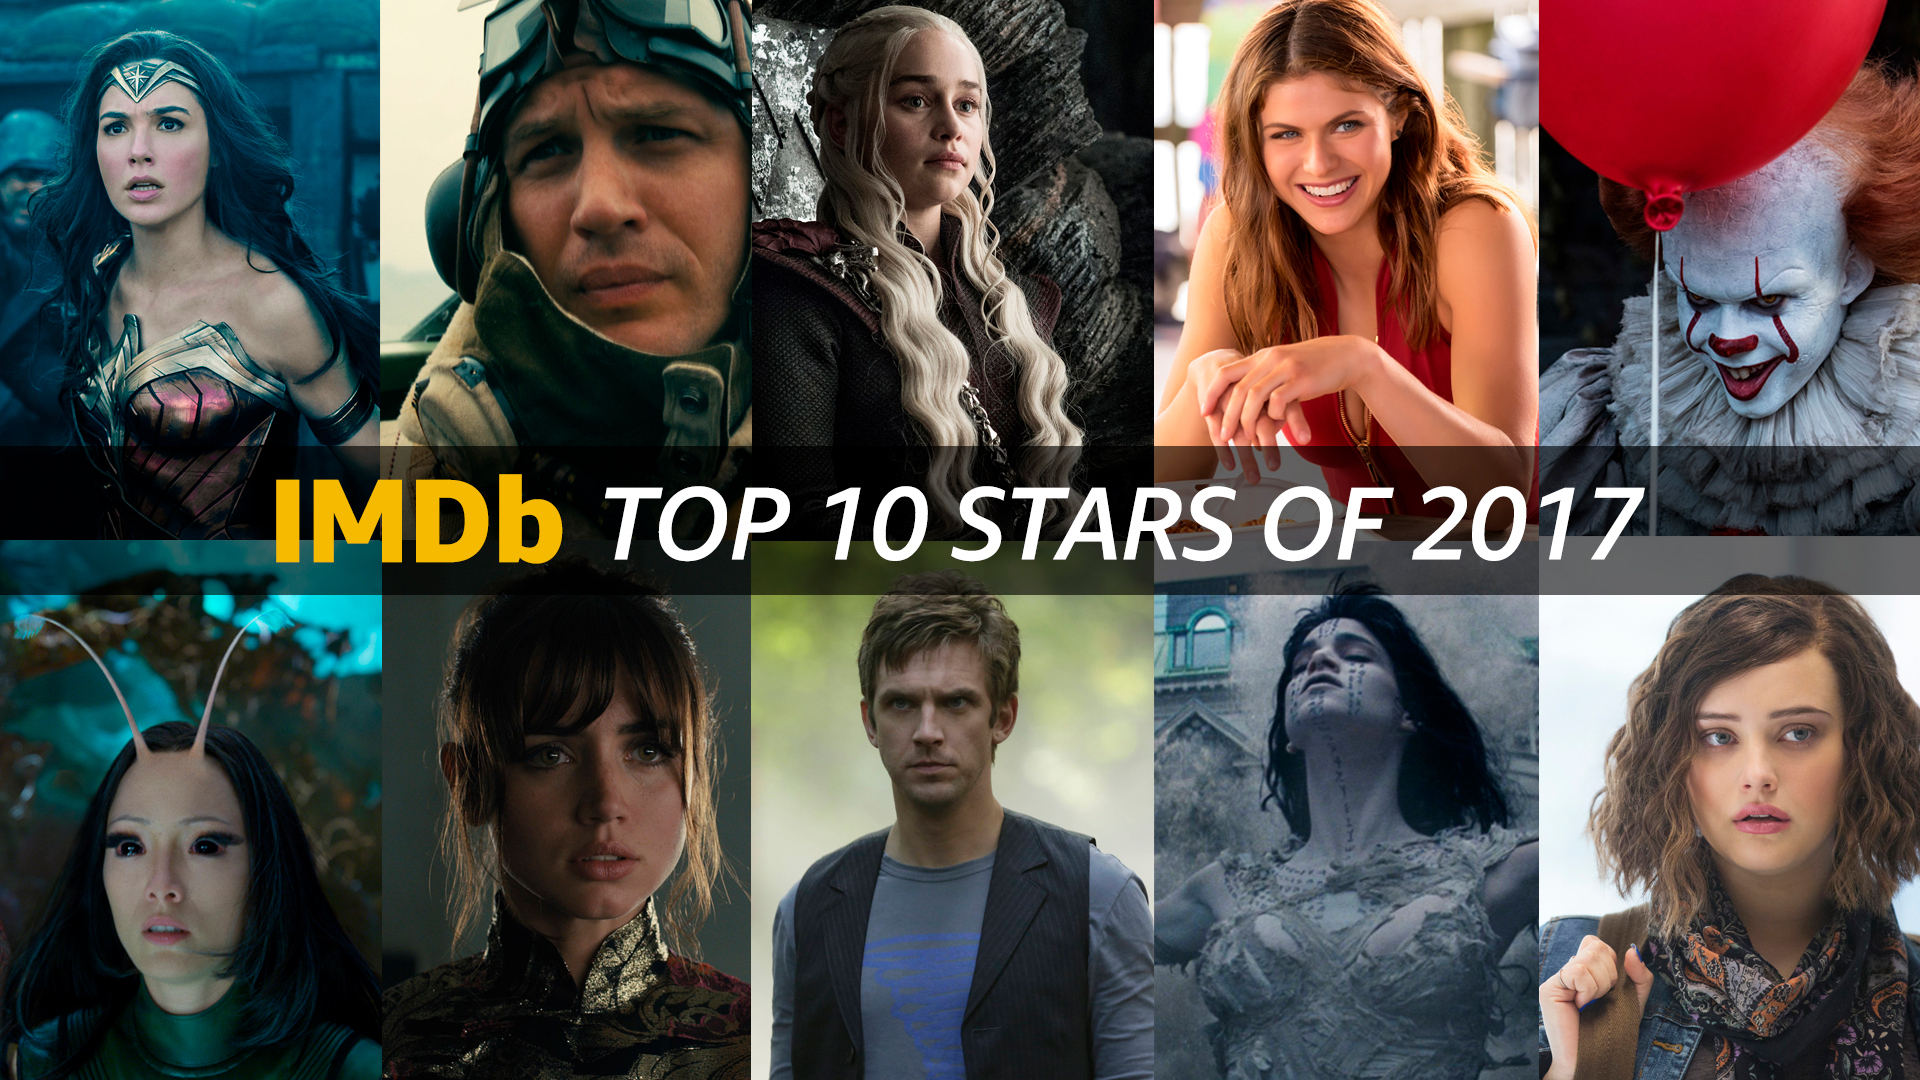 Imdb Announces The Top 10 Stars And Top 10 Breakout Stars Of 2017 As